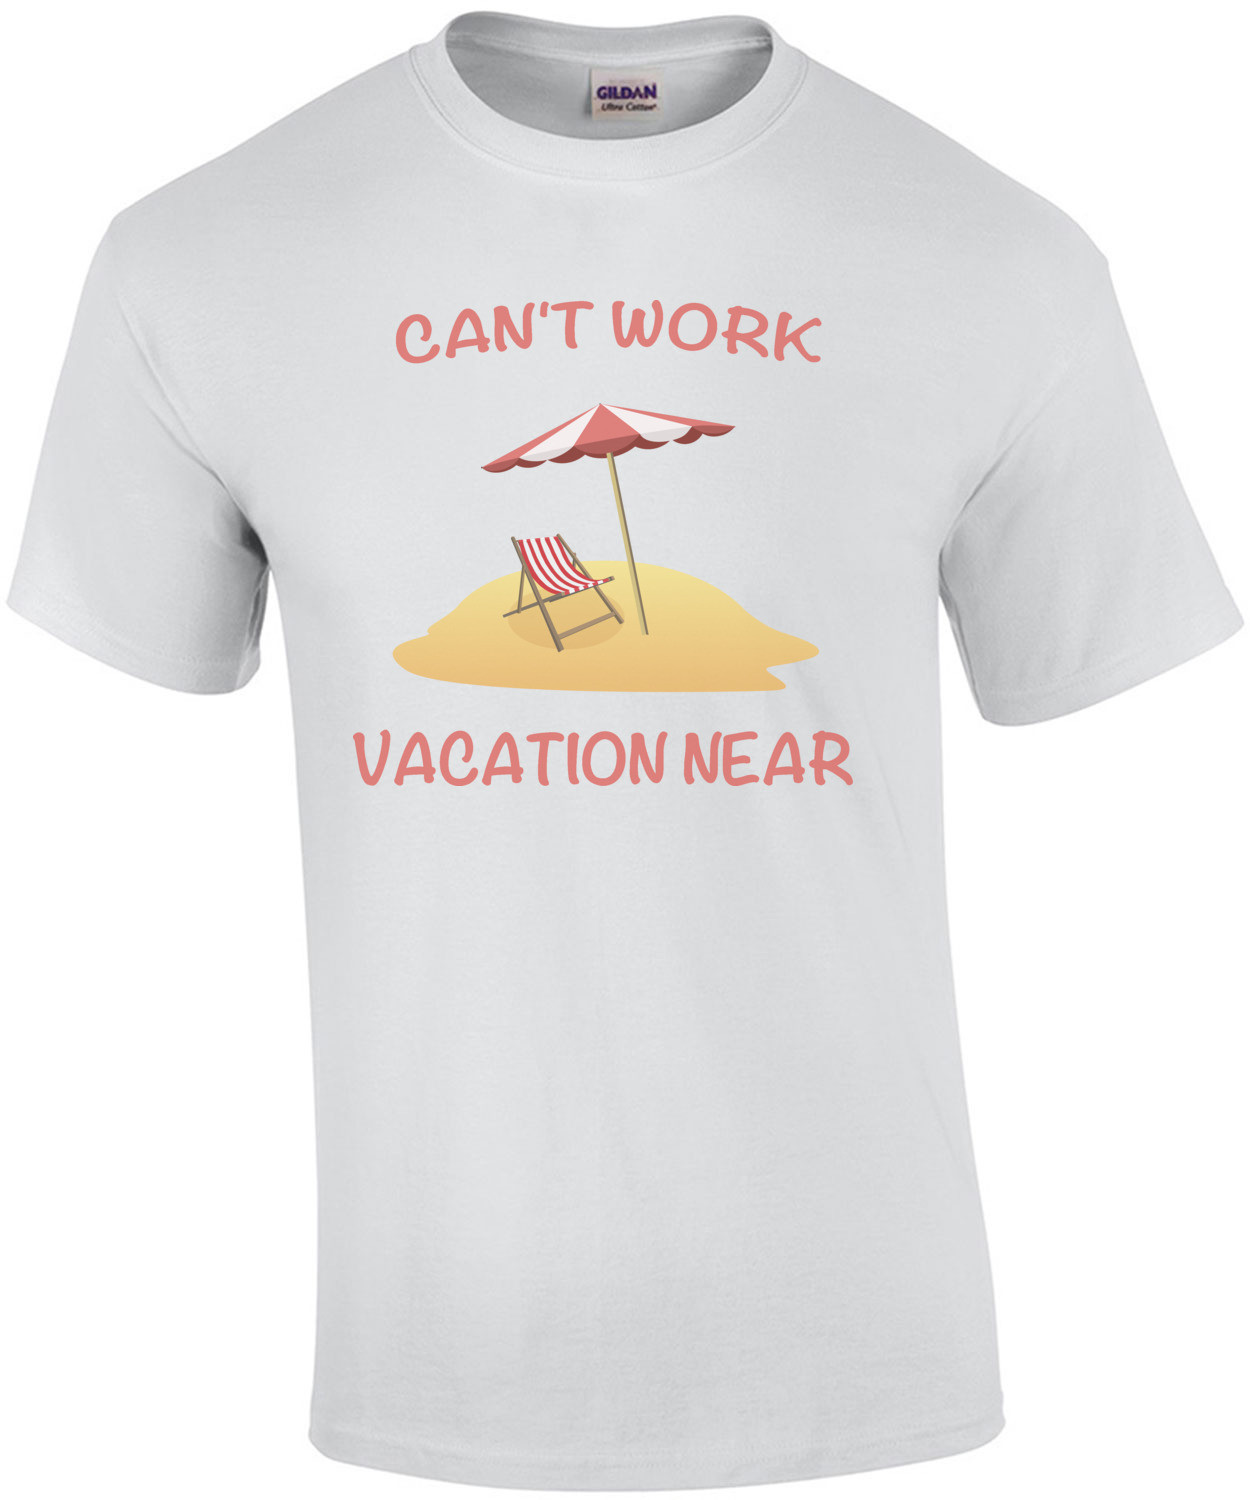 Can't Work Vacation Near Funny